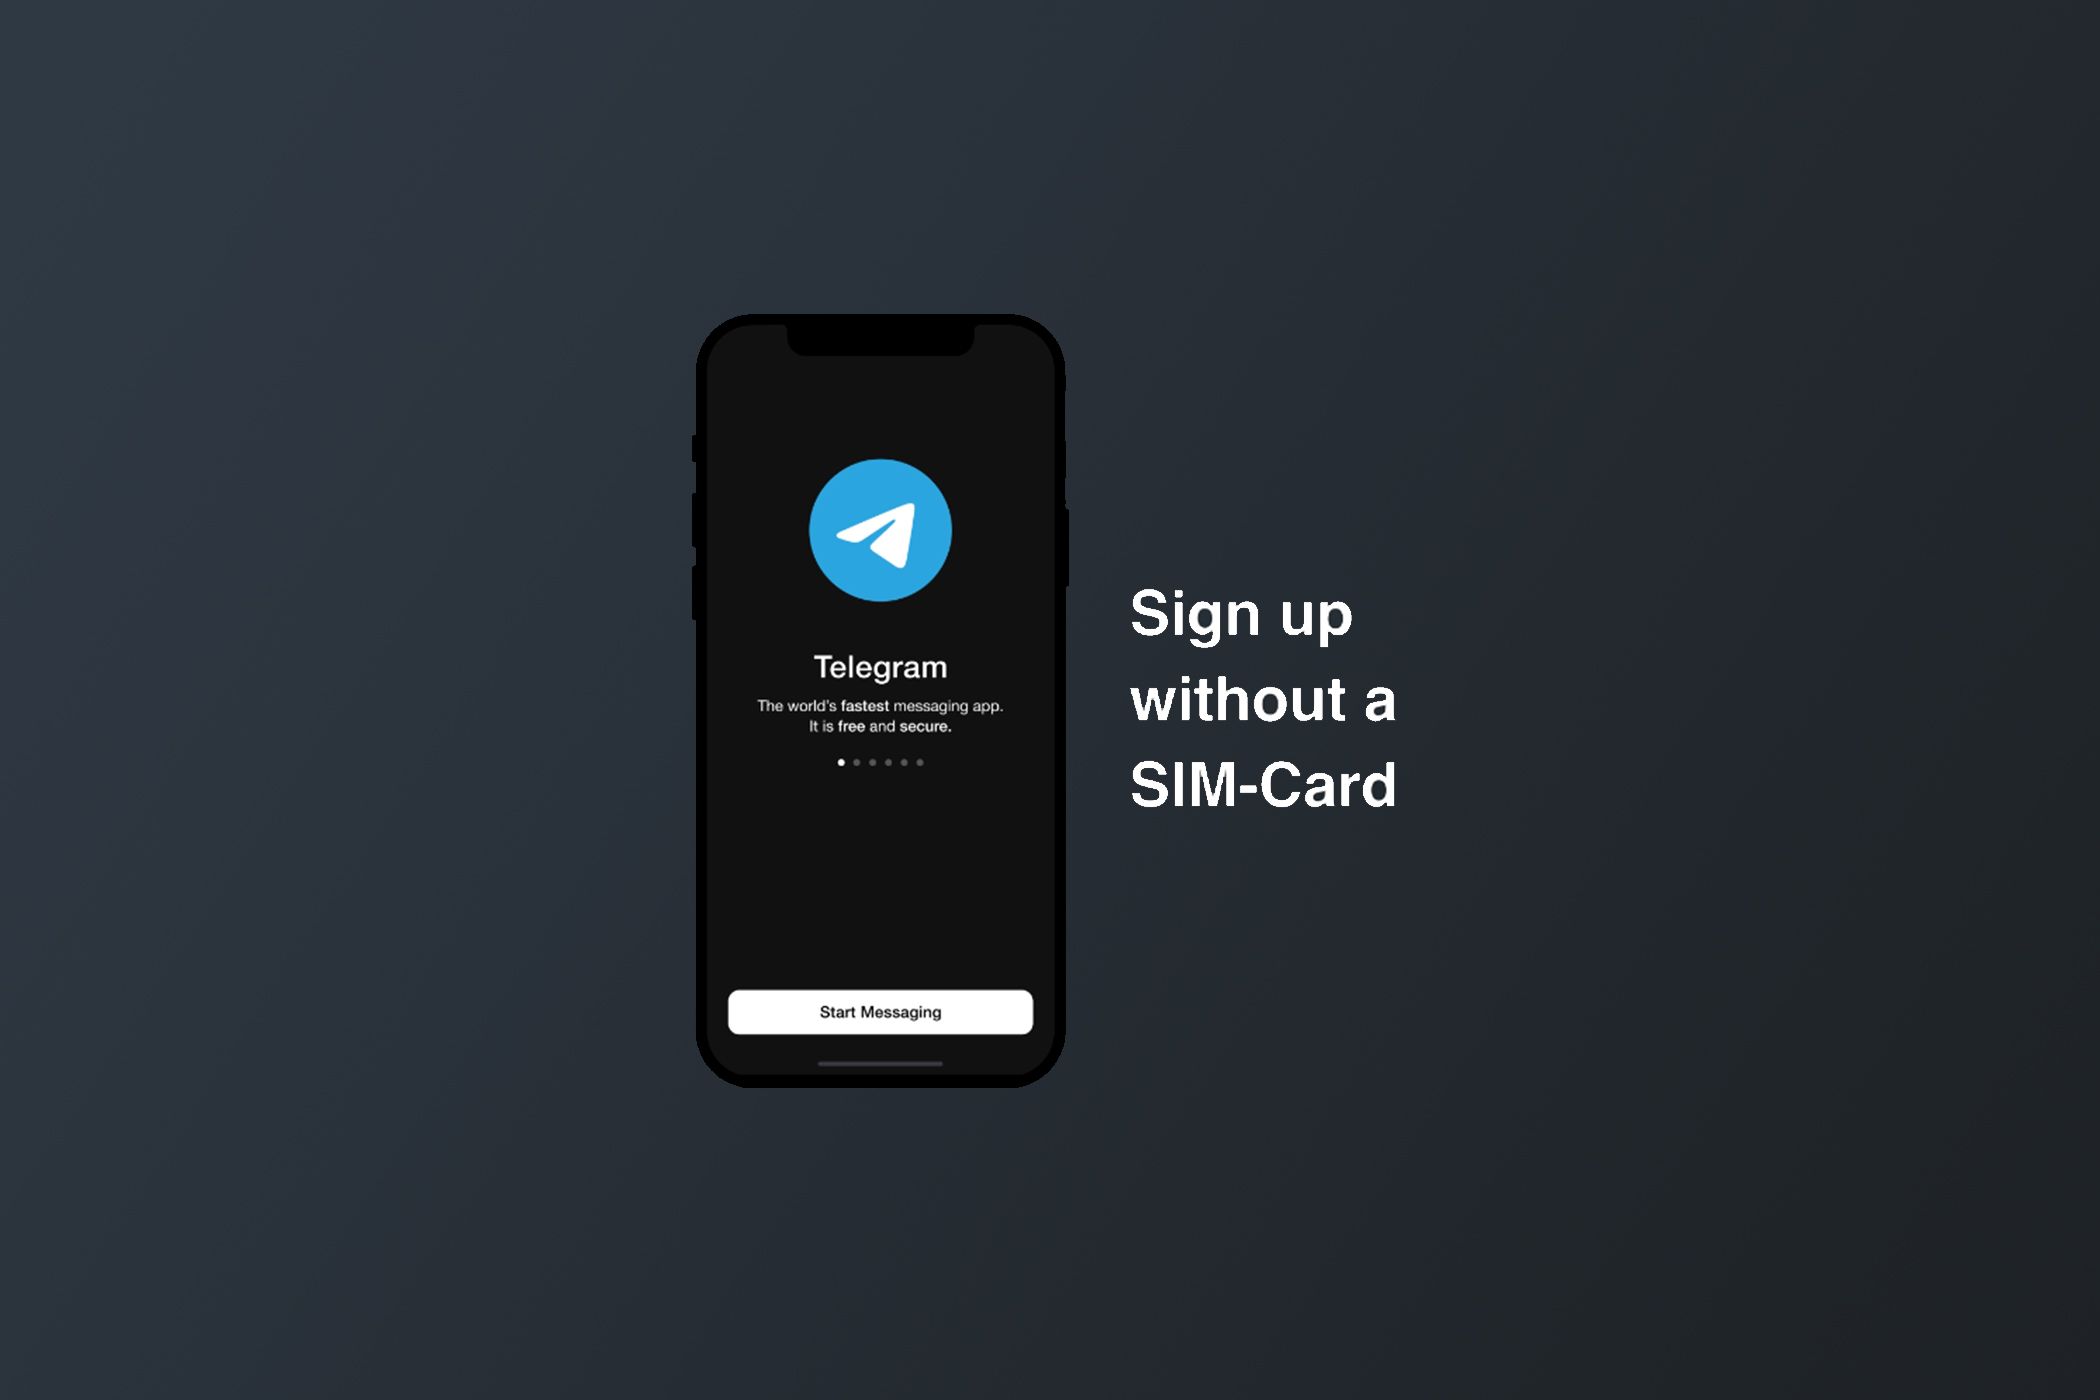 iPhone mokup with Telegram signup on screen and text on the side saying Sign up with a SIM card.